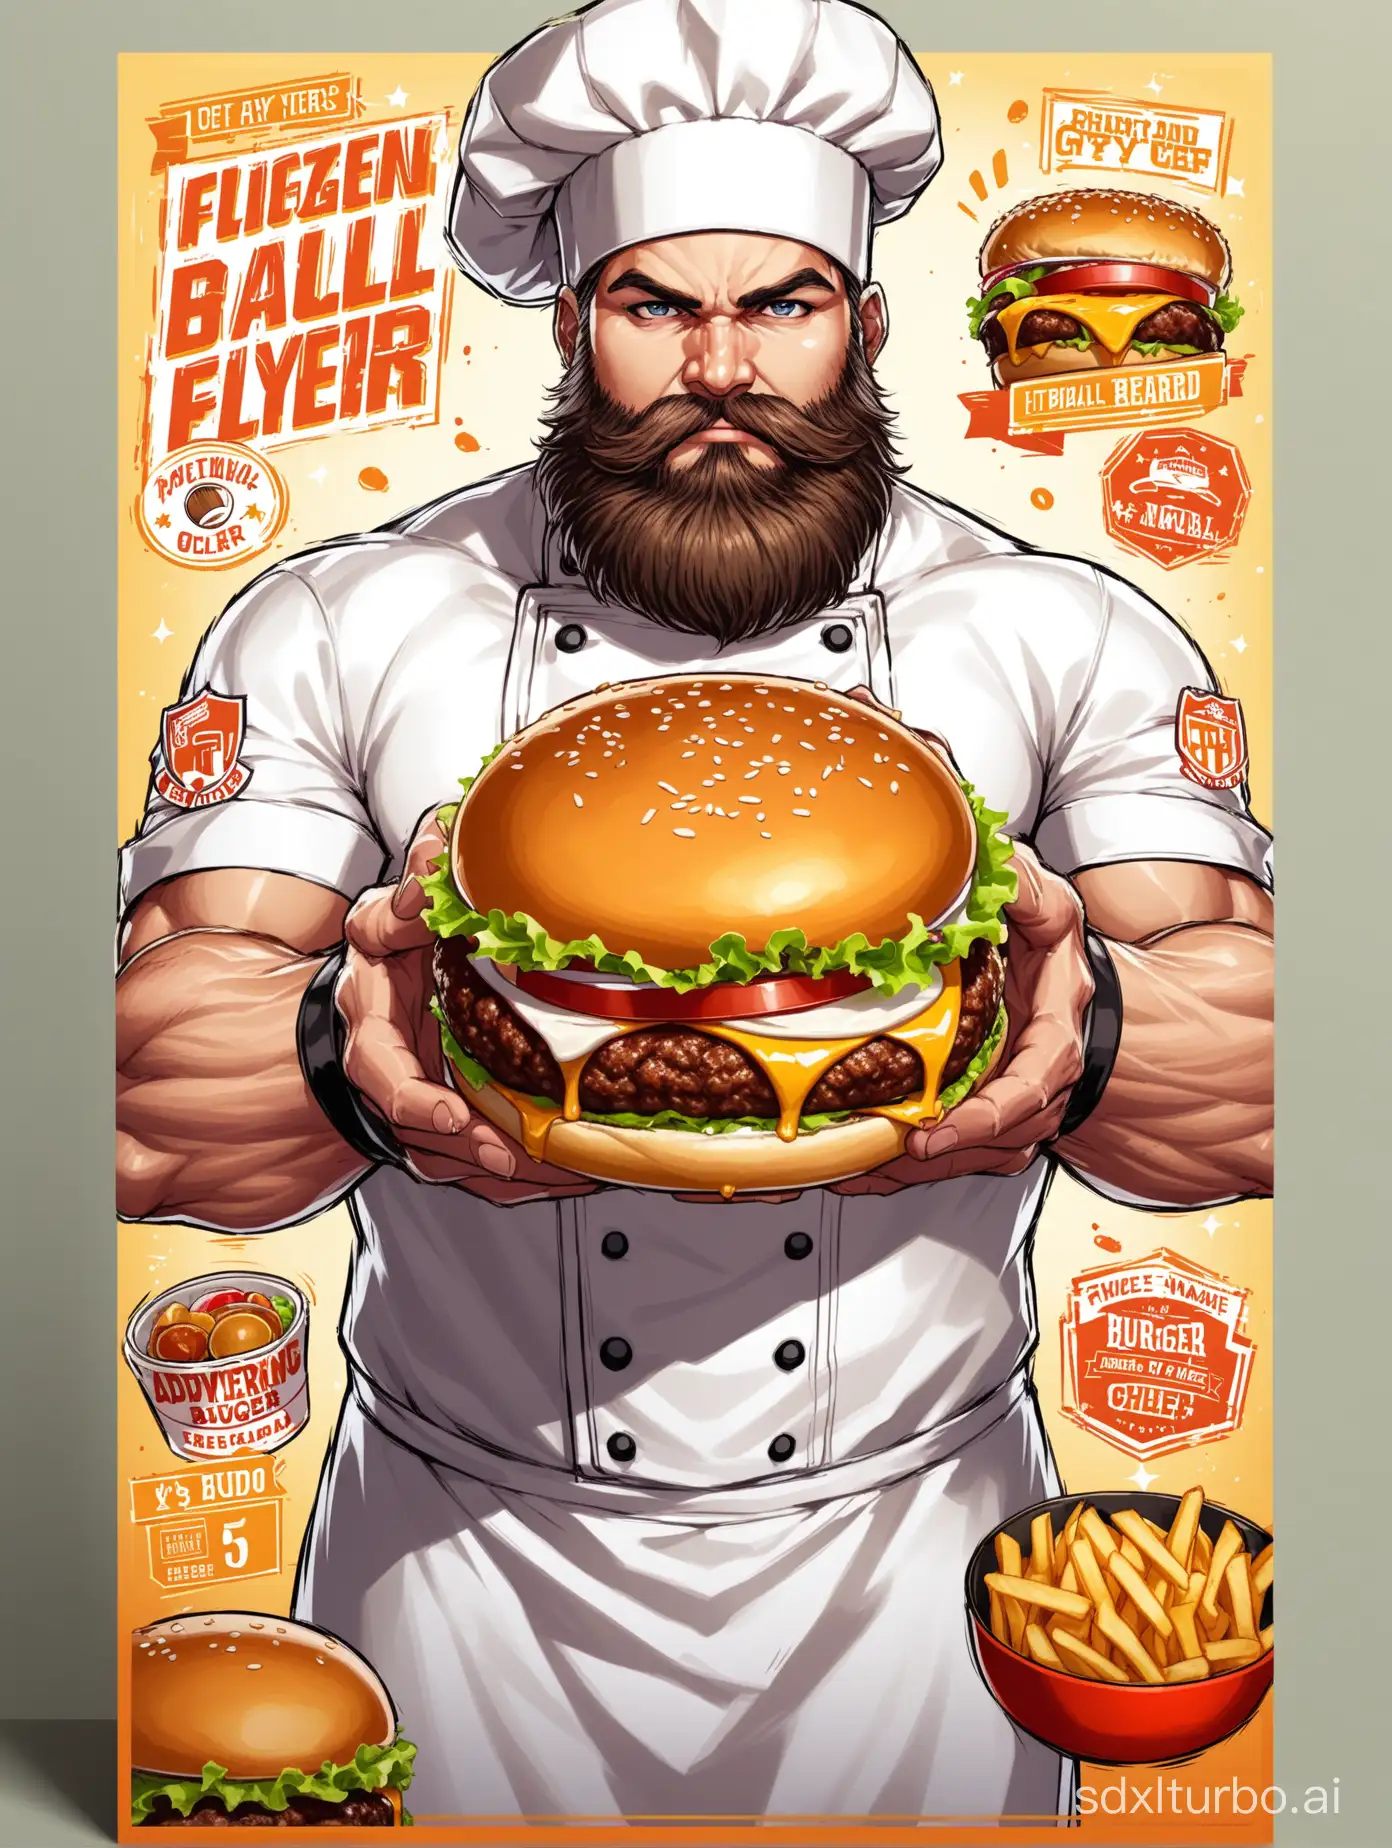 A brutal guy with a beard holding a burger, a chef, football, a ball, a flyer for advertising